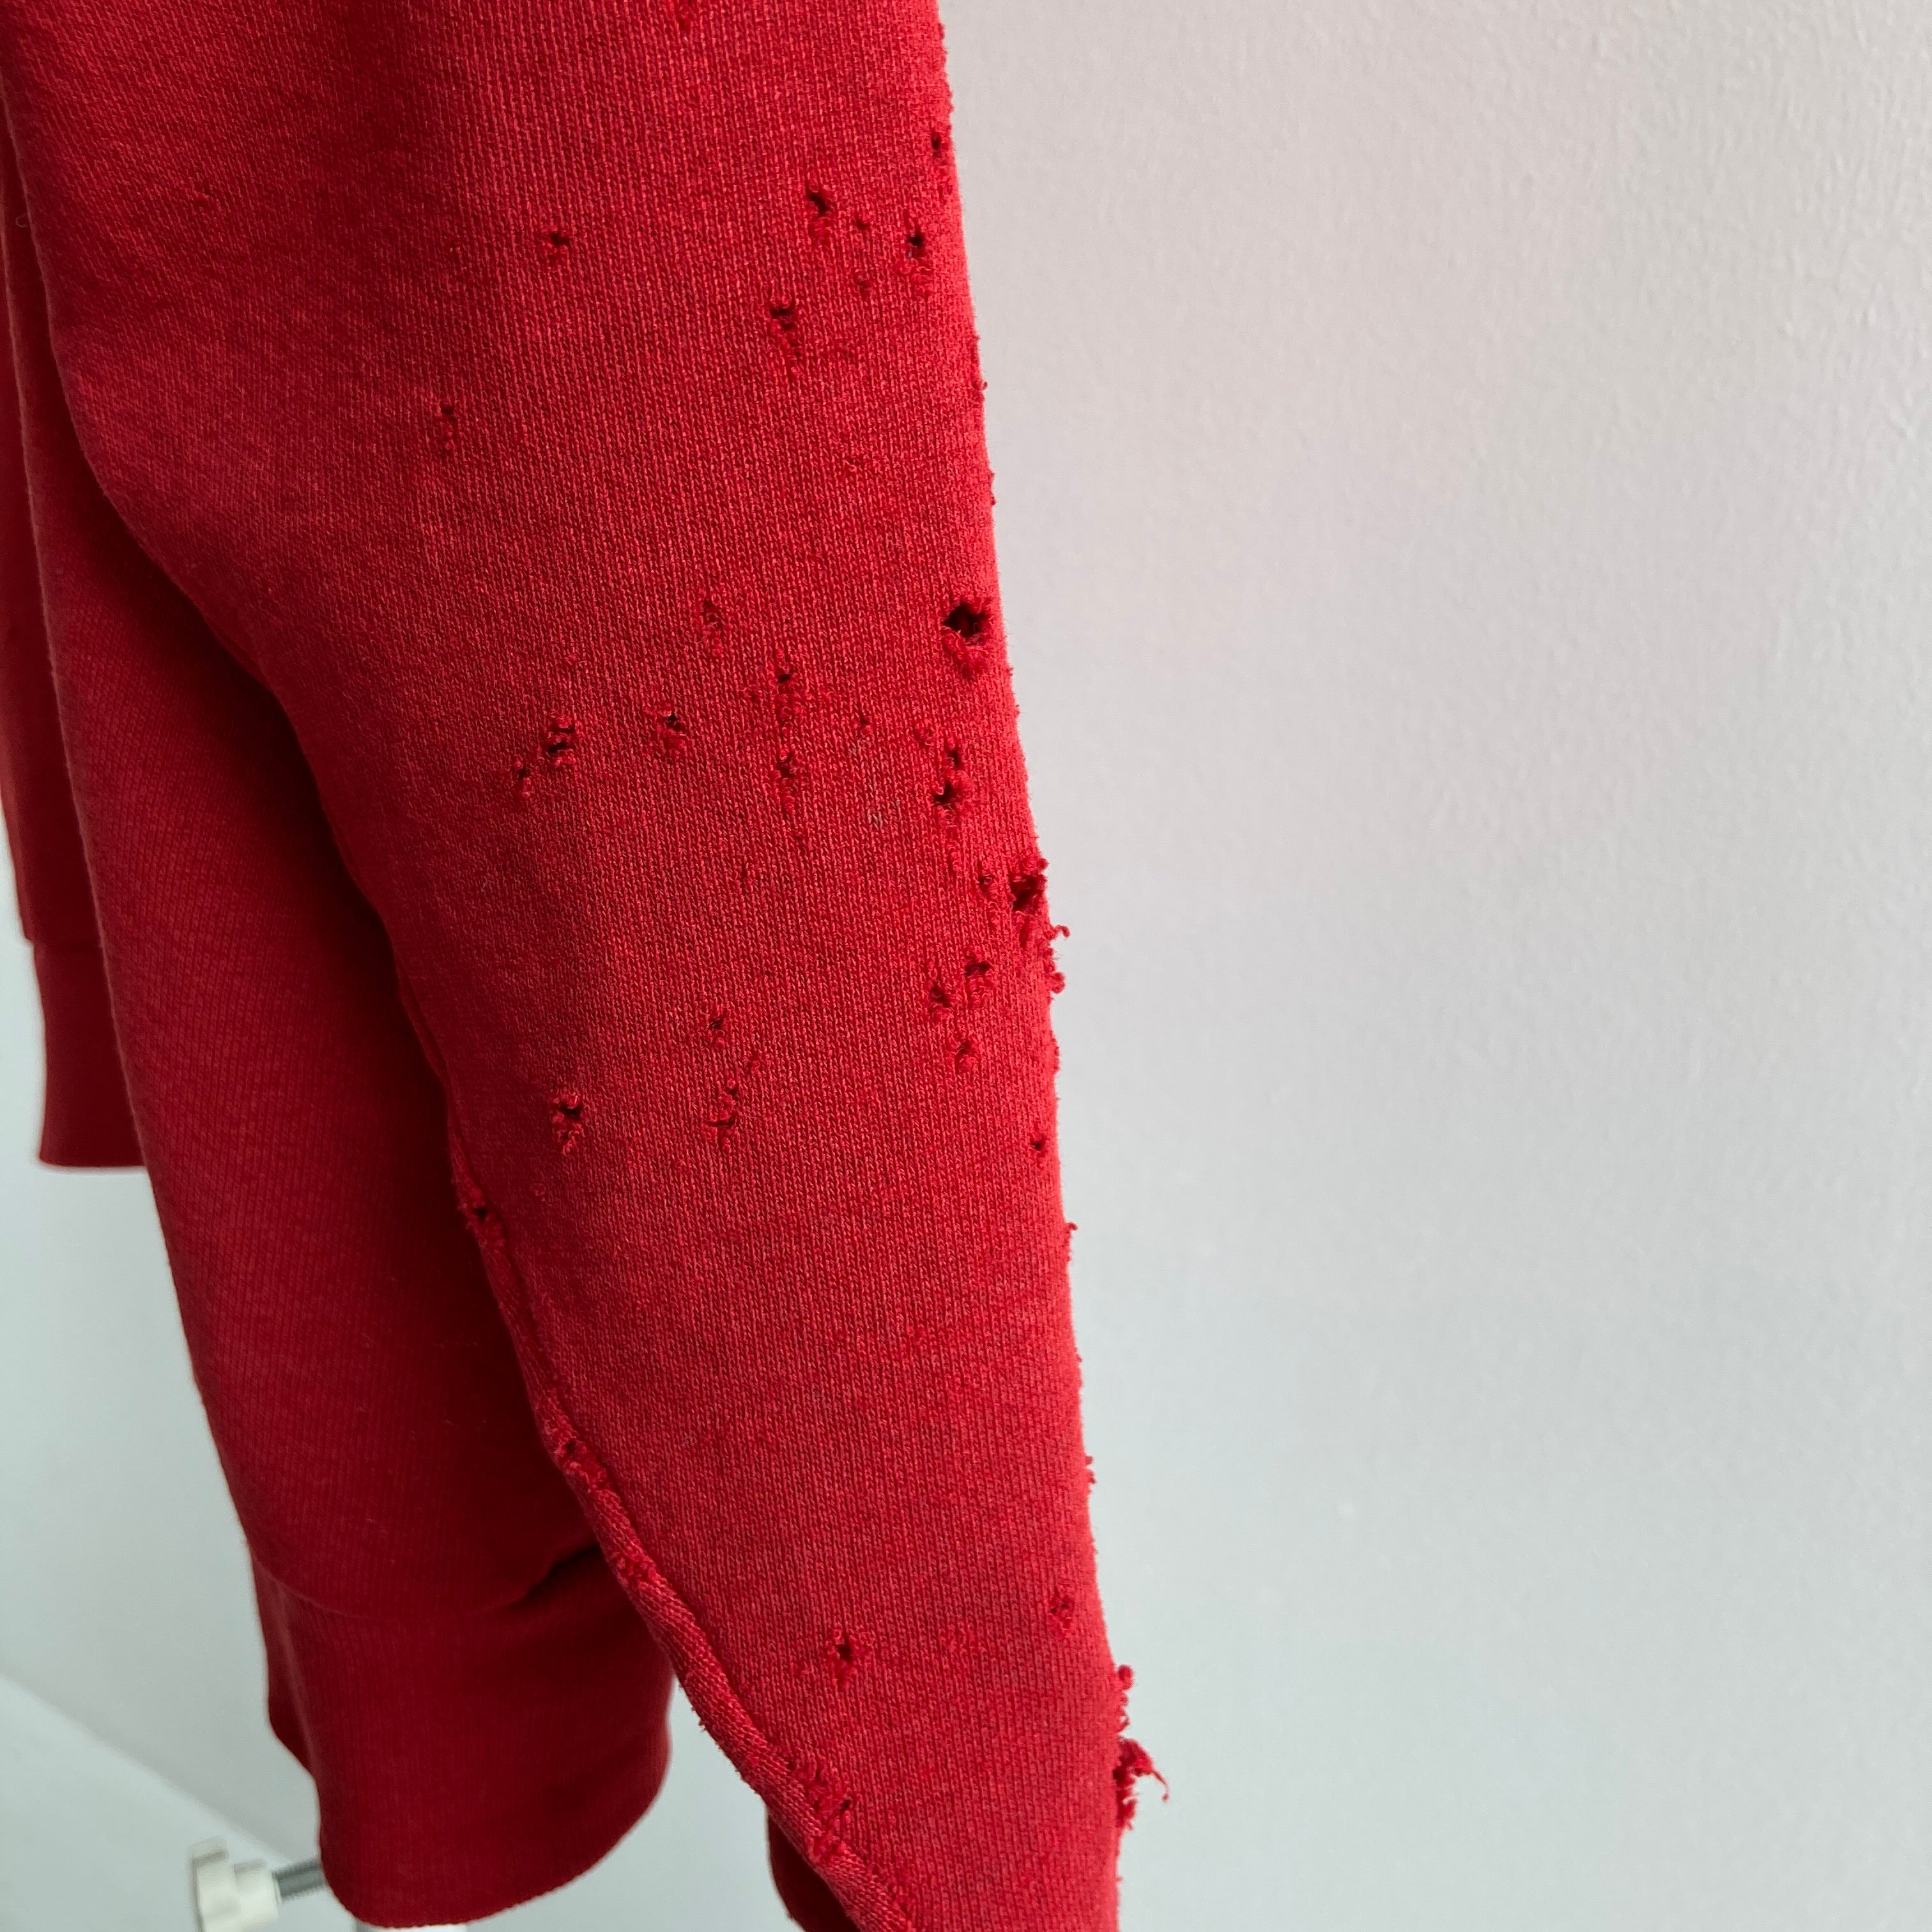 90's Beyond Destroyed, Patched, Then Destroyed Again Red And Khaki Oil-And-Then-Some Stained Sweatshirt